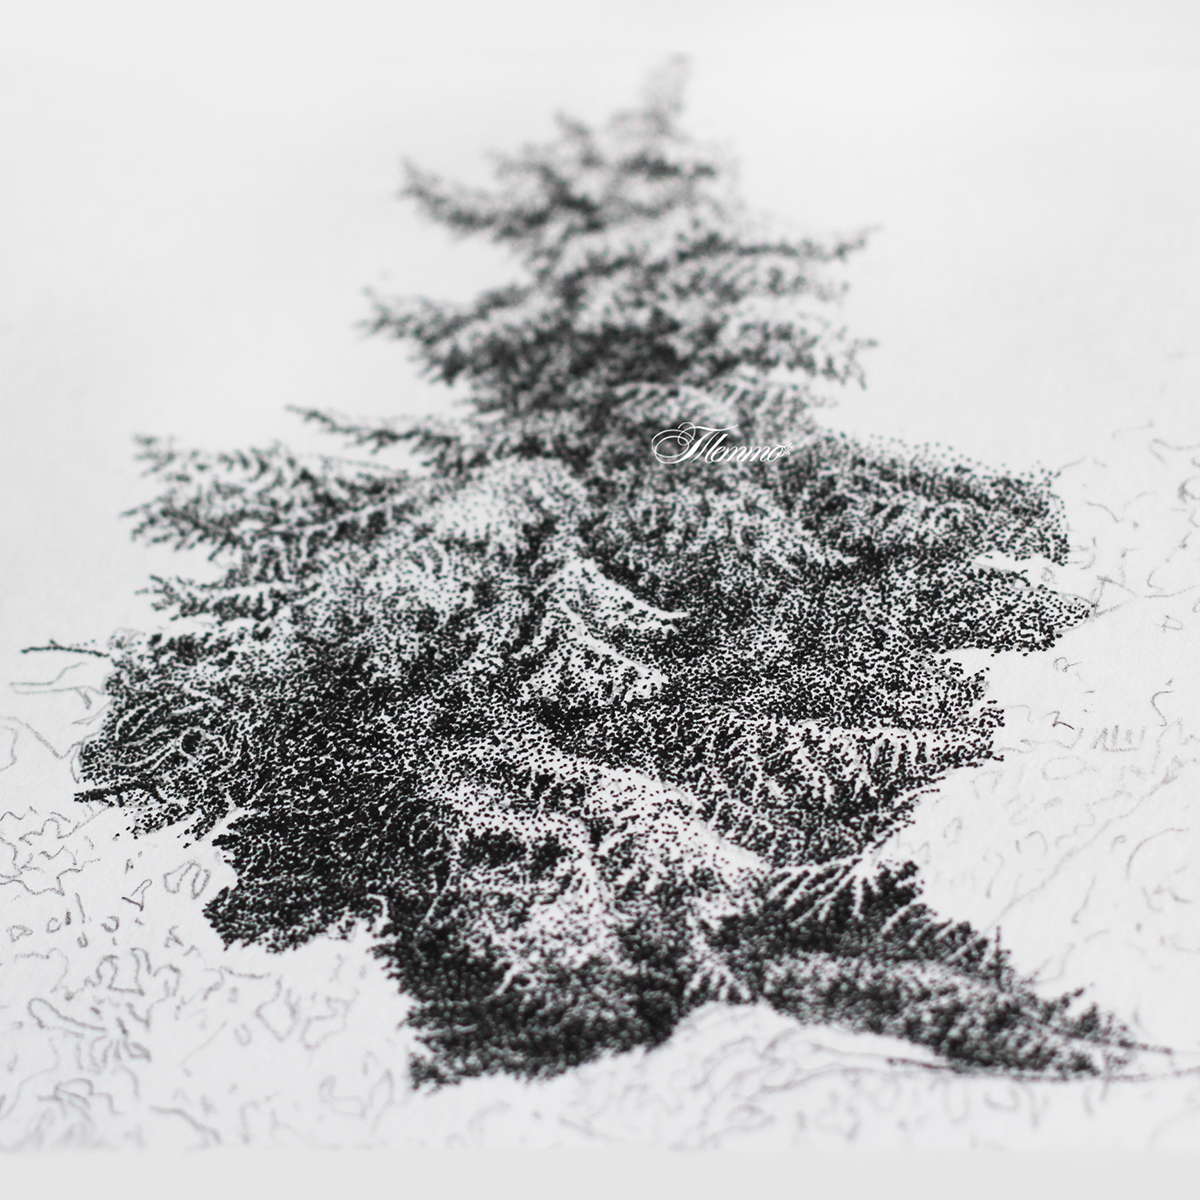 Drawing-Landscapes-in-Pencil